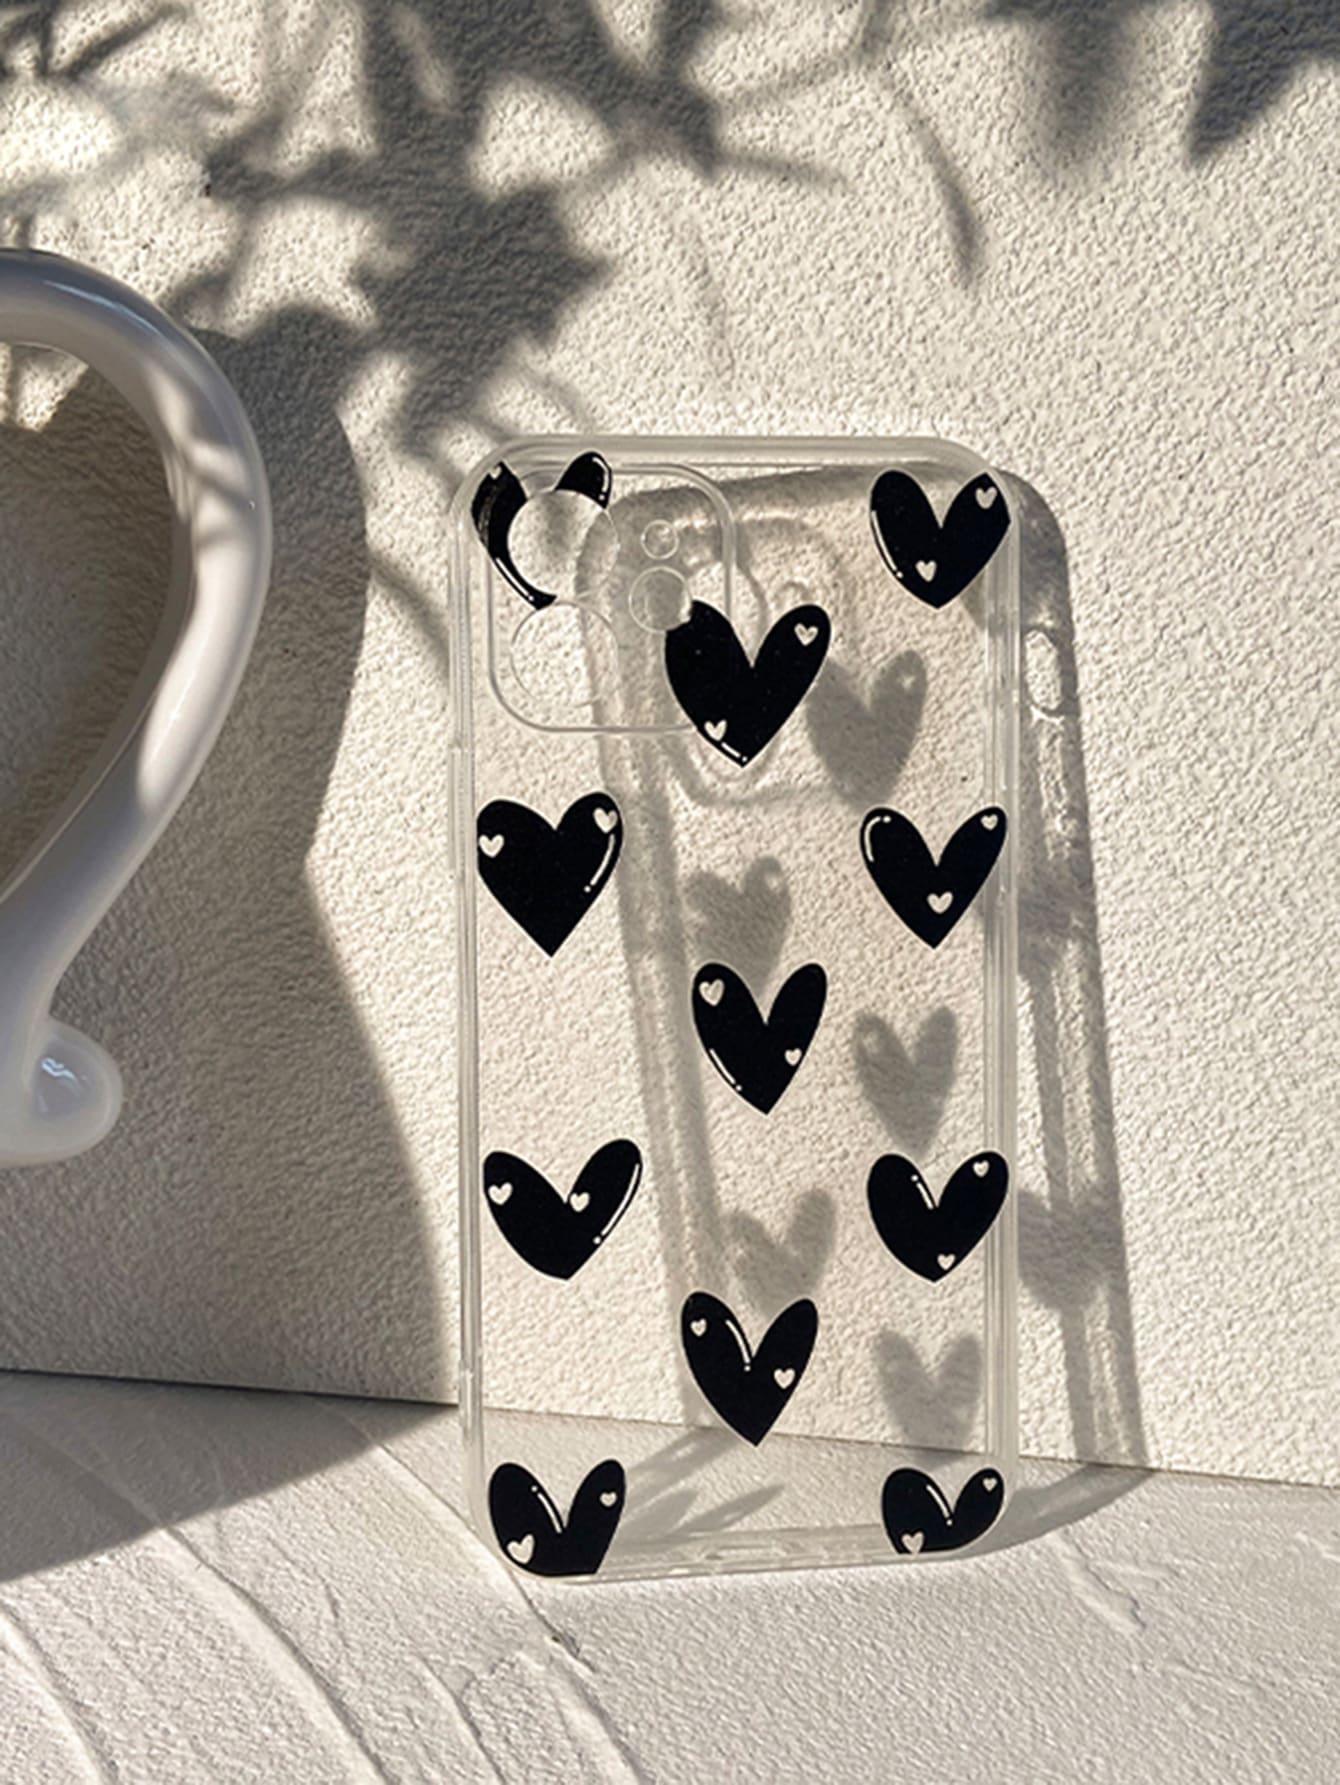 Heart Pattern Clear Phone Case With Stand-Out Phone Grip - Decotree.co Online Shop